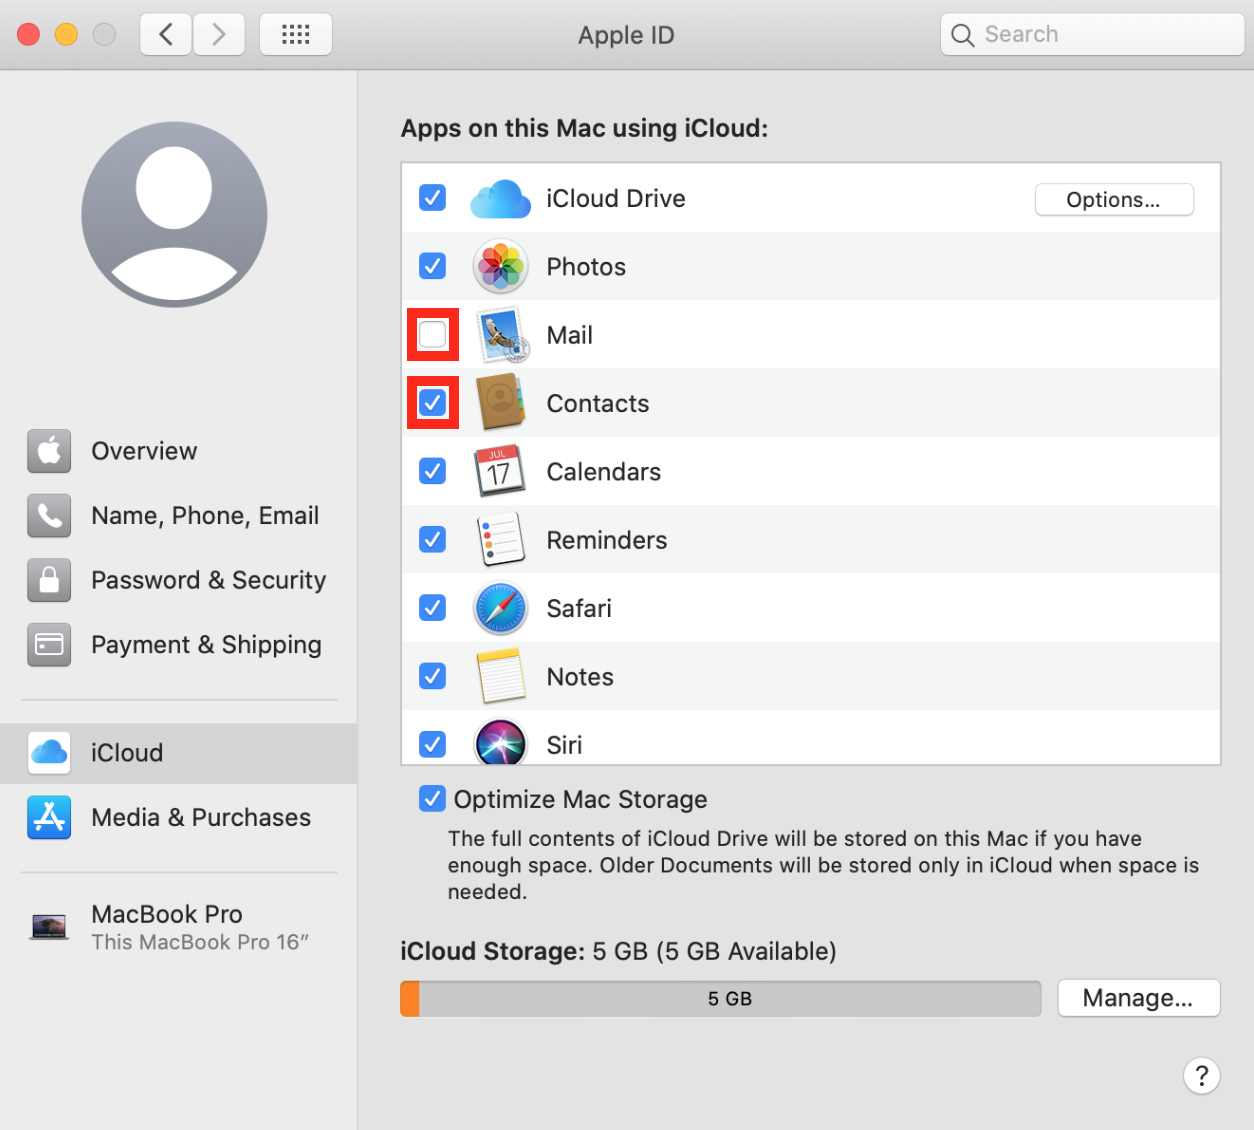 Screenshot of a Mac user interface showing apps connected with iCloud